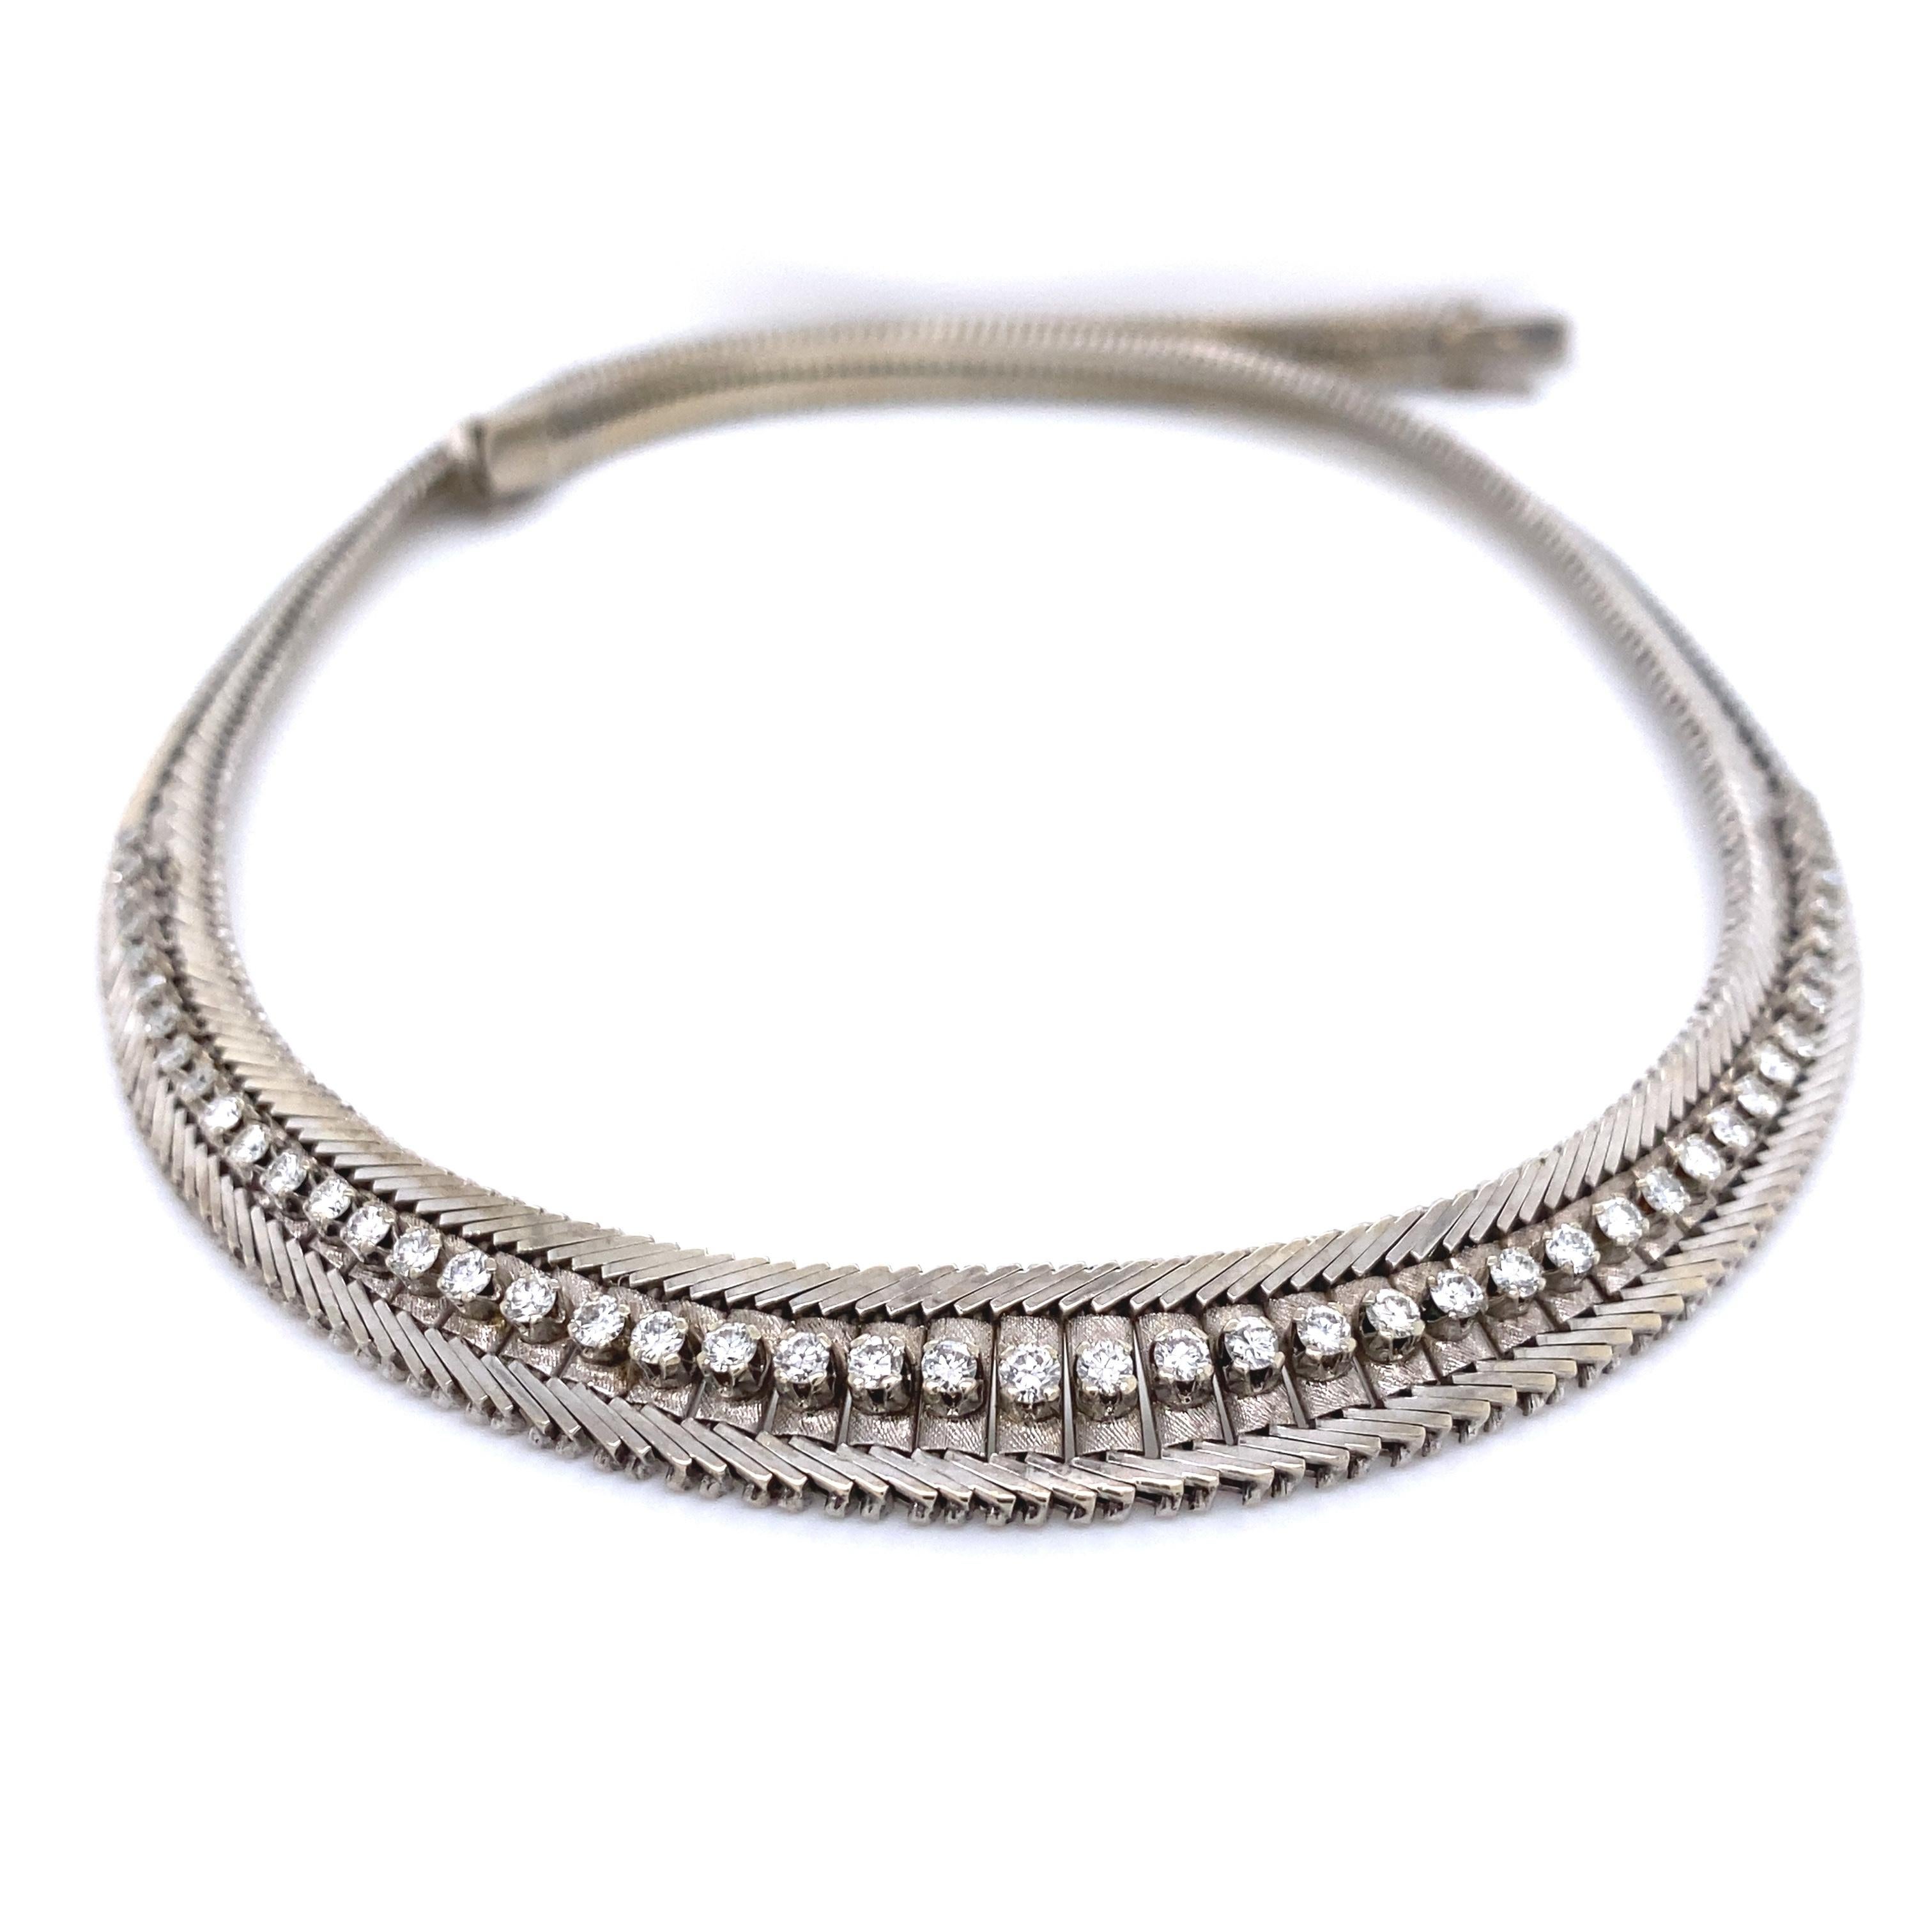 Chic and Stylish! Beautiful Diamond 18K Gold Mid Century Modern Collar Necklace. Hand set with 47 Diamonds, weighing approx. 2.00 total Carat weight. Necklace measures approx. 16.5” long. Hand crafted in 18K White Gold. Circa: 1950s. More Beautiful